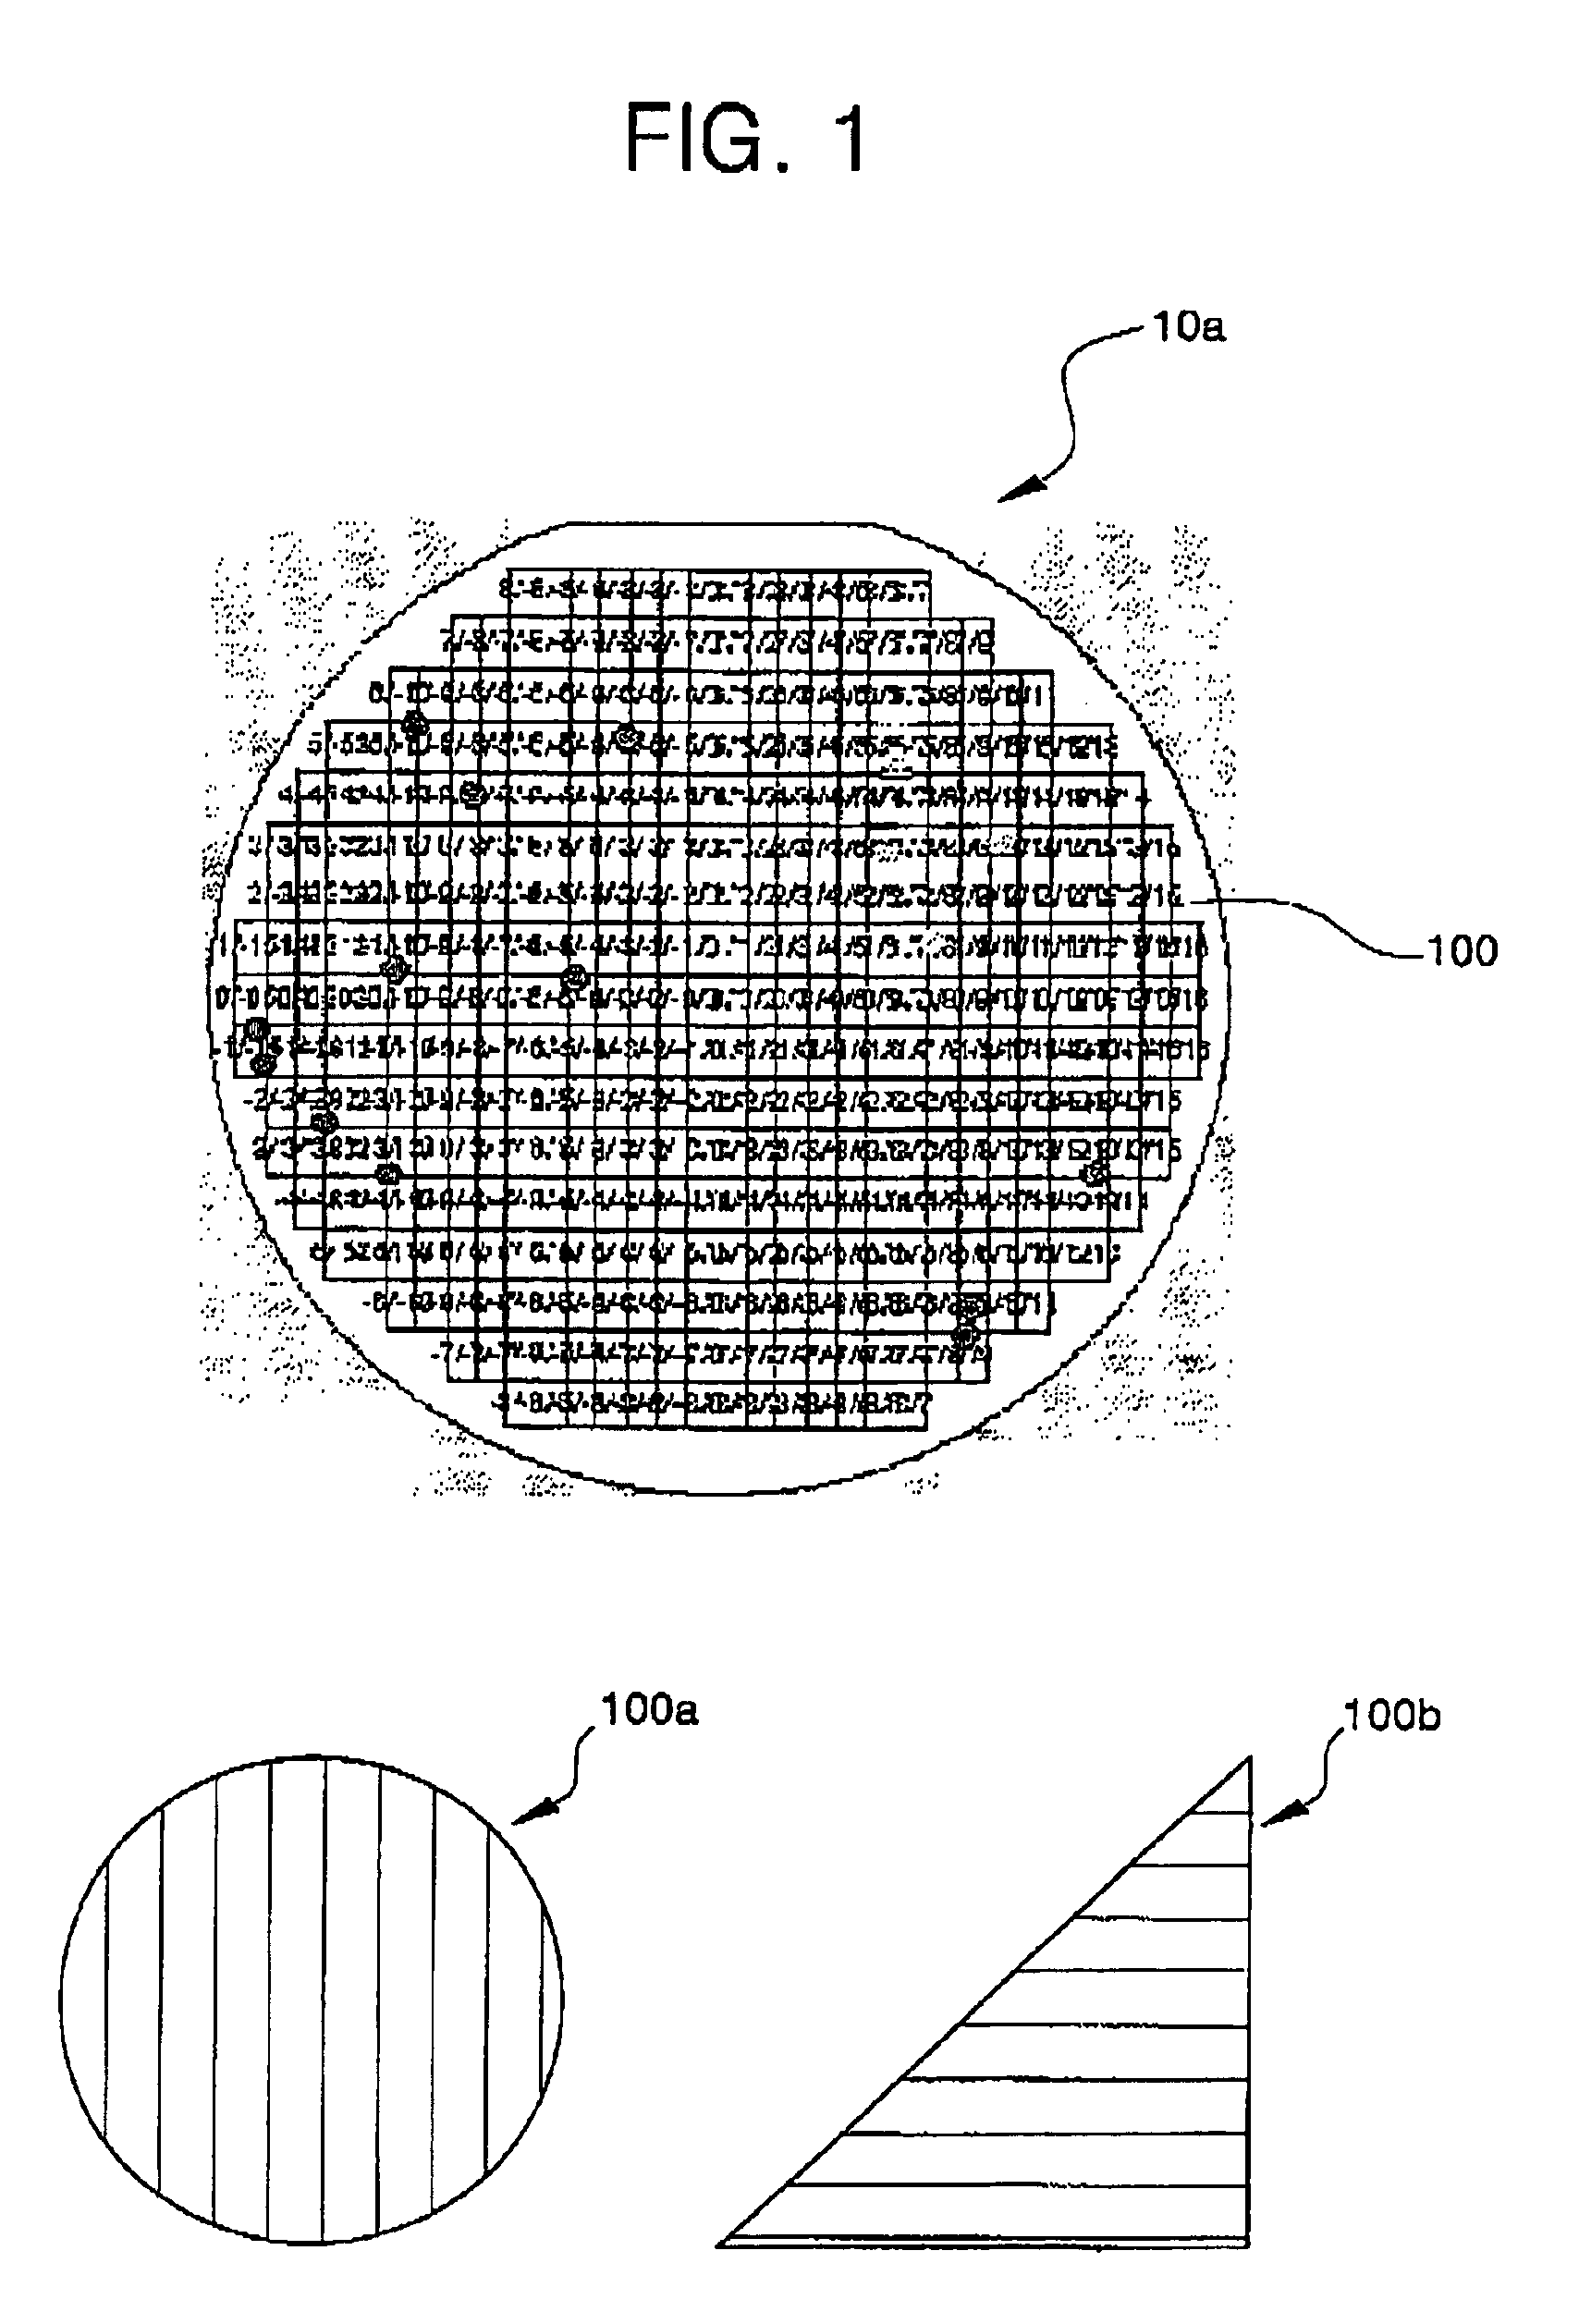 Method of identifying and analyzing semiconductor chip defects